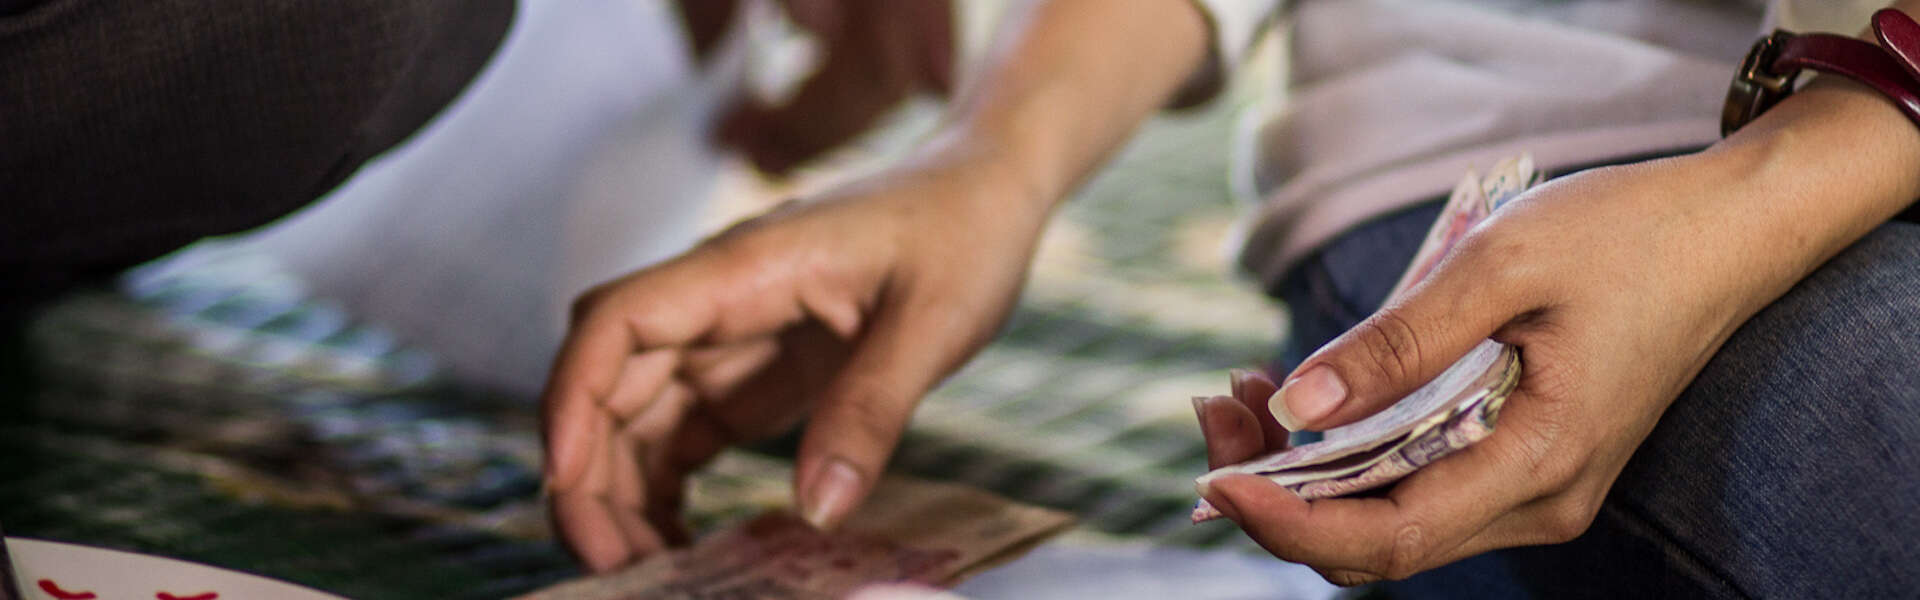 Don’t Fear the Rate Cap: Why Cambodia’s Microcredit Regulations Aren’t Such a Bad Thing, on NextBillion.net